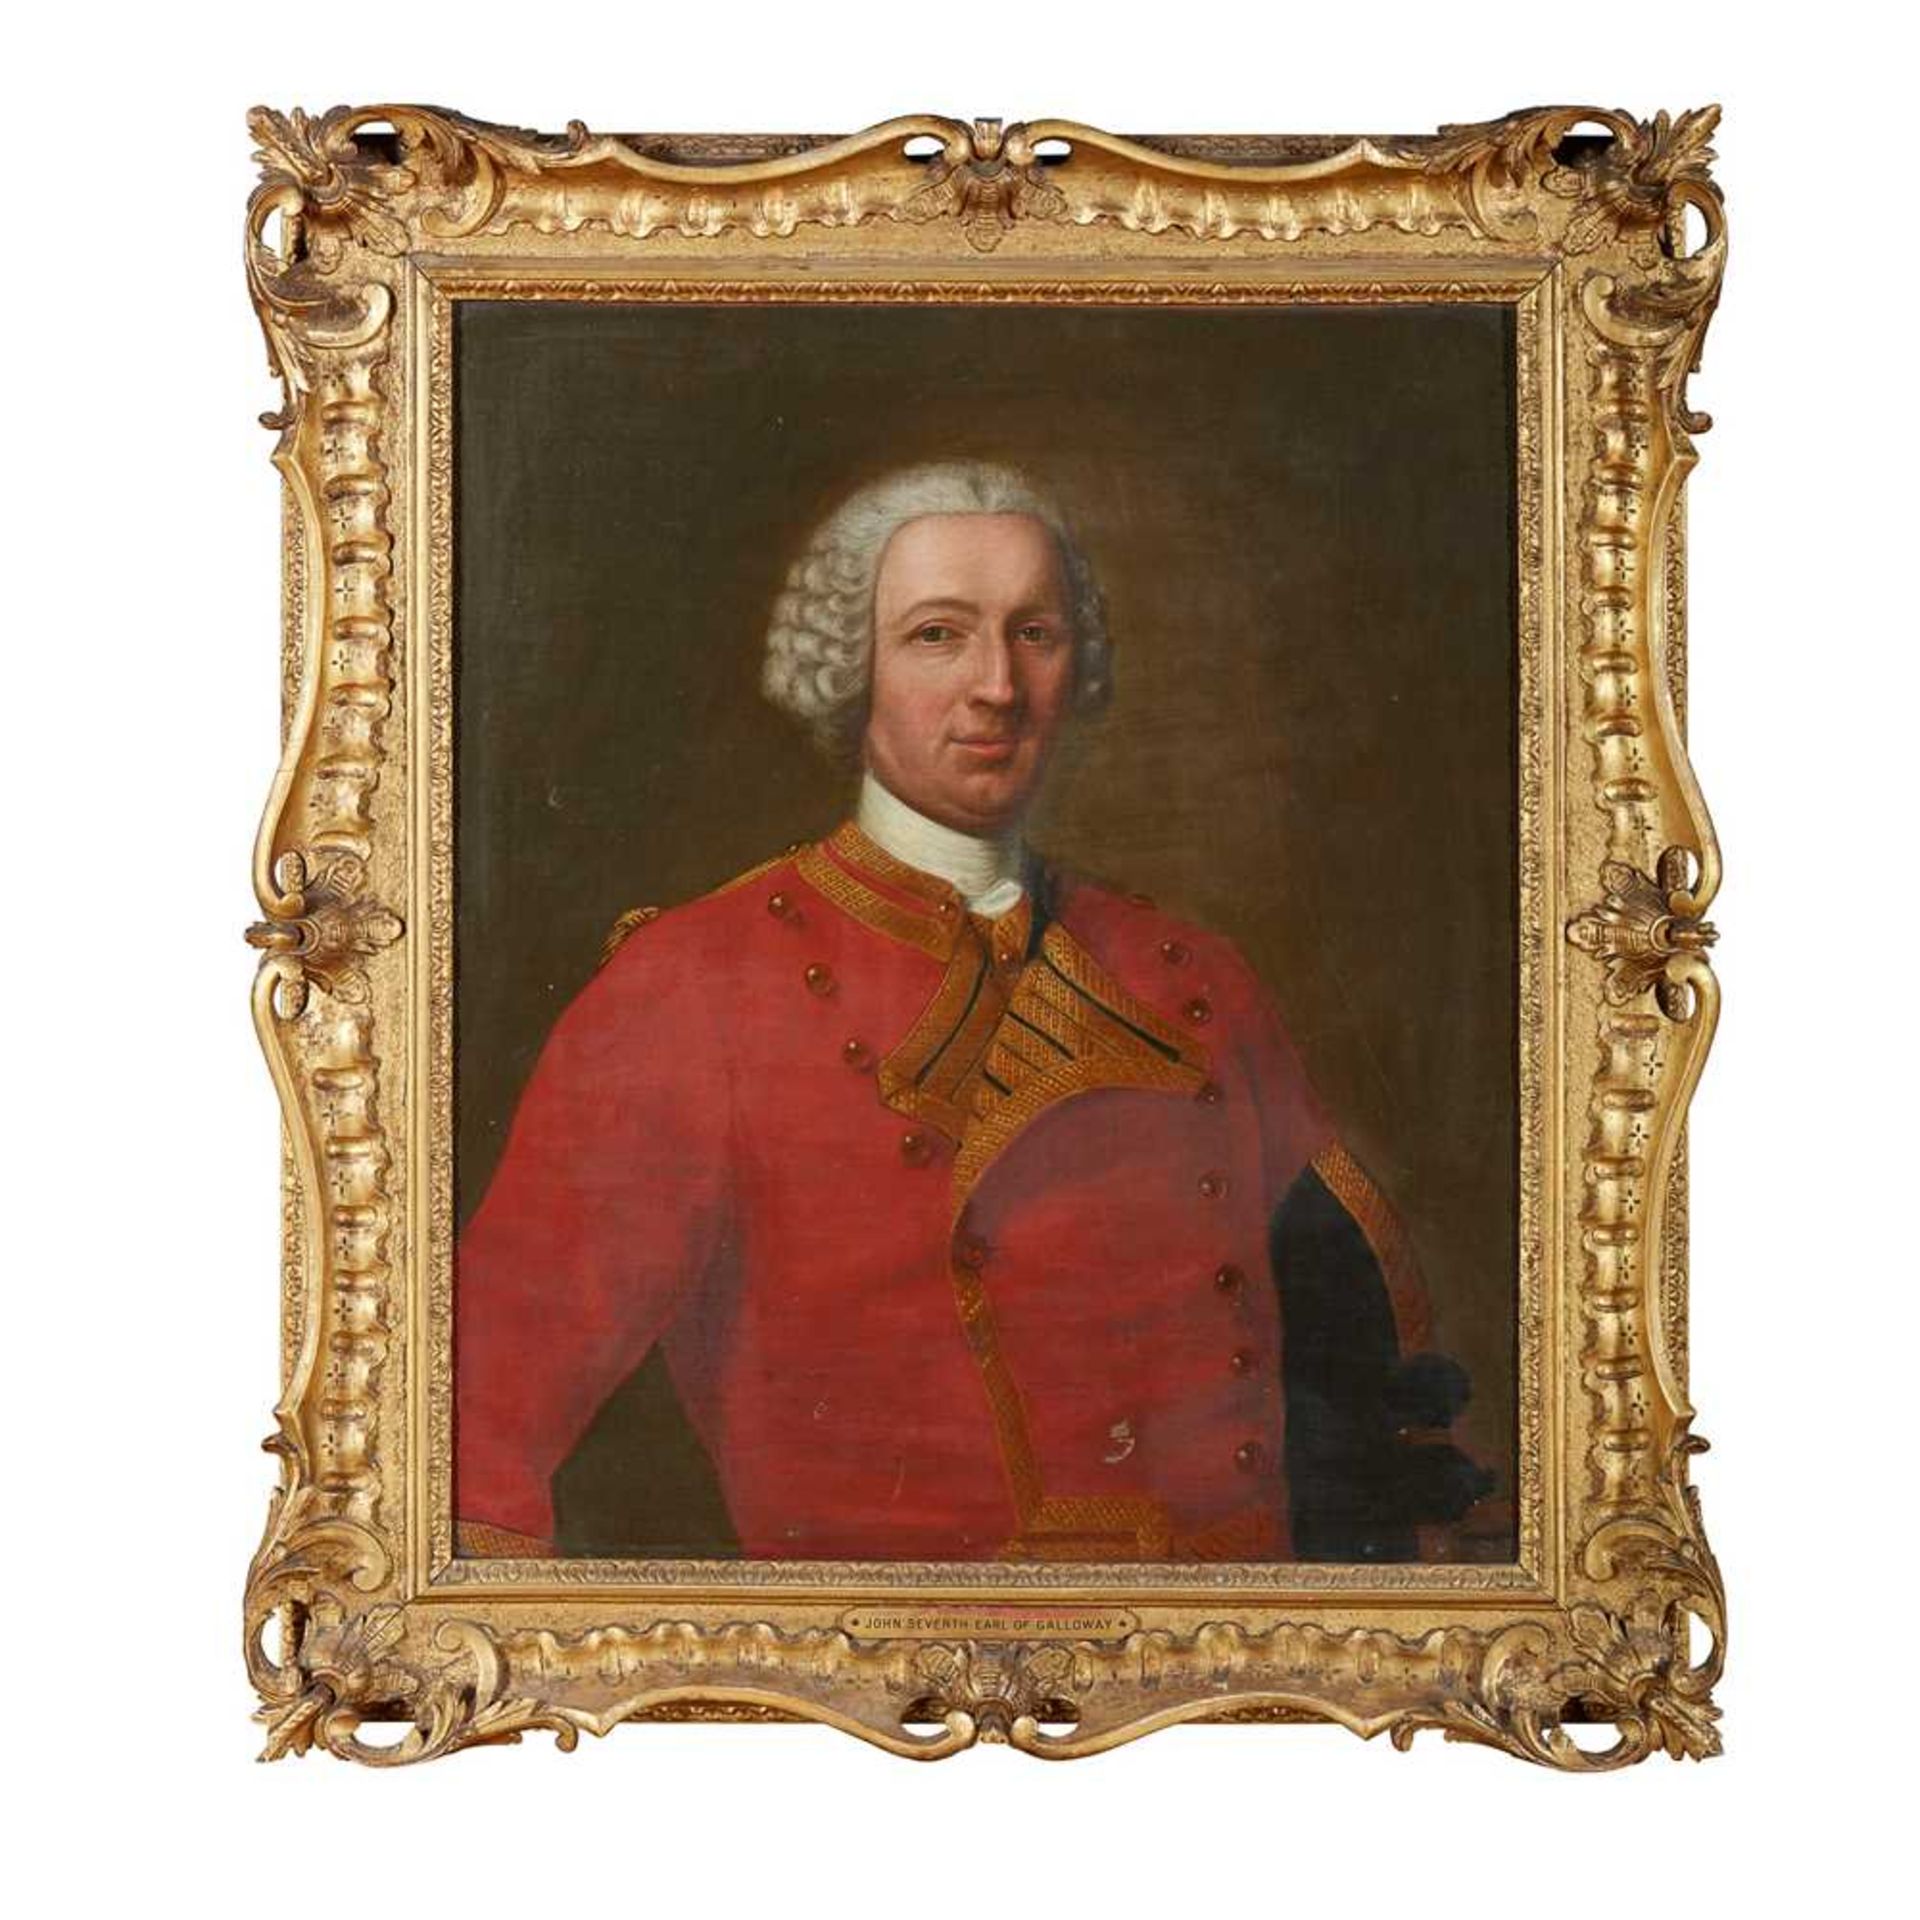 MANNER OF COSMO ALEXANDER PORTRAIT OF JOHN, 7TH EARL OF GALLOWAY - Image 2 of 3